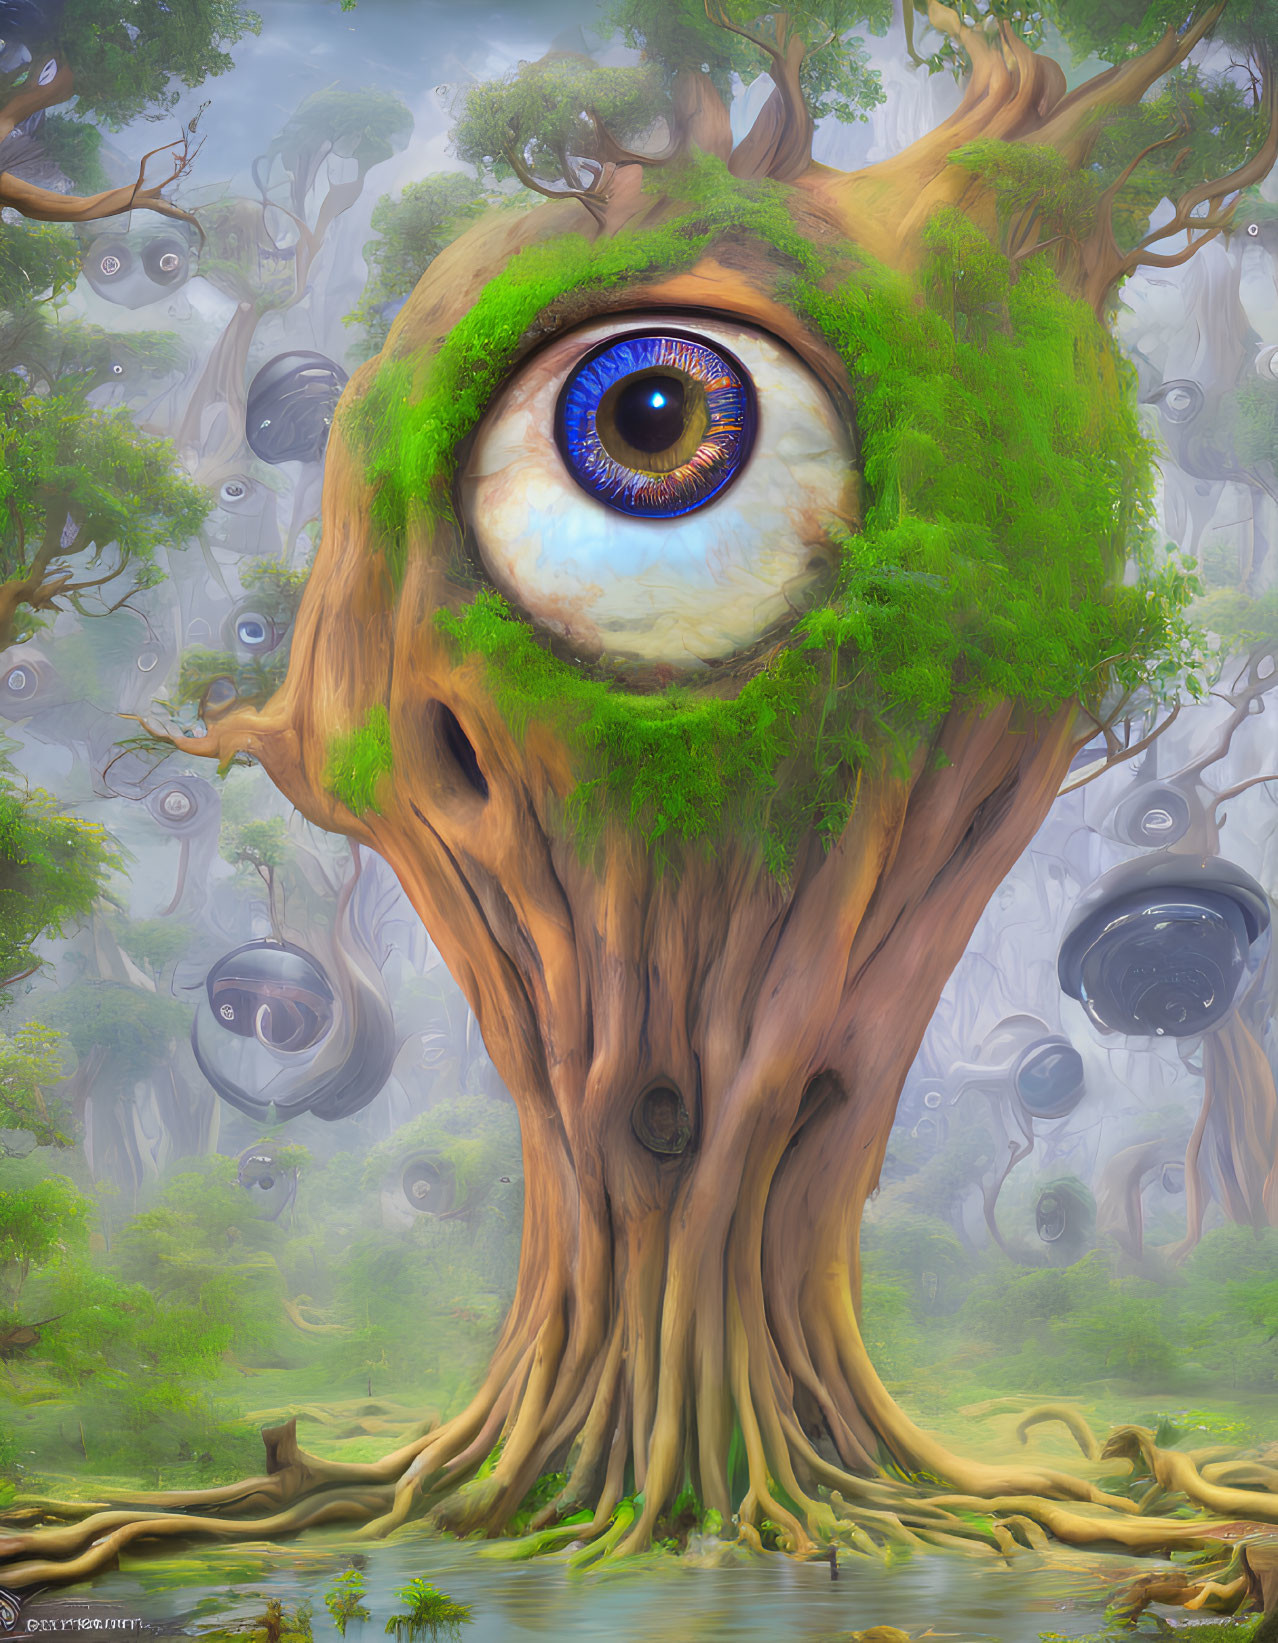 Surreal image of giant tree with blue eye in misty forest